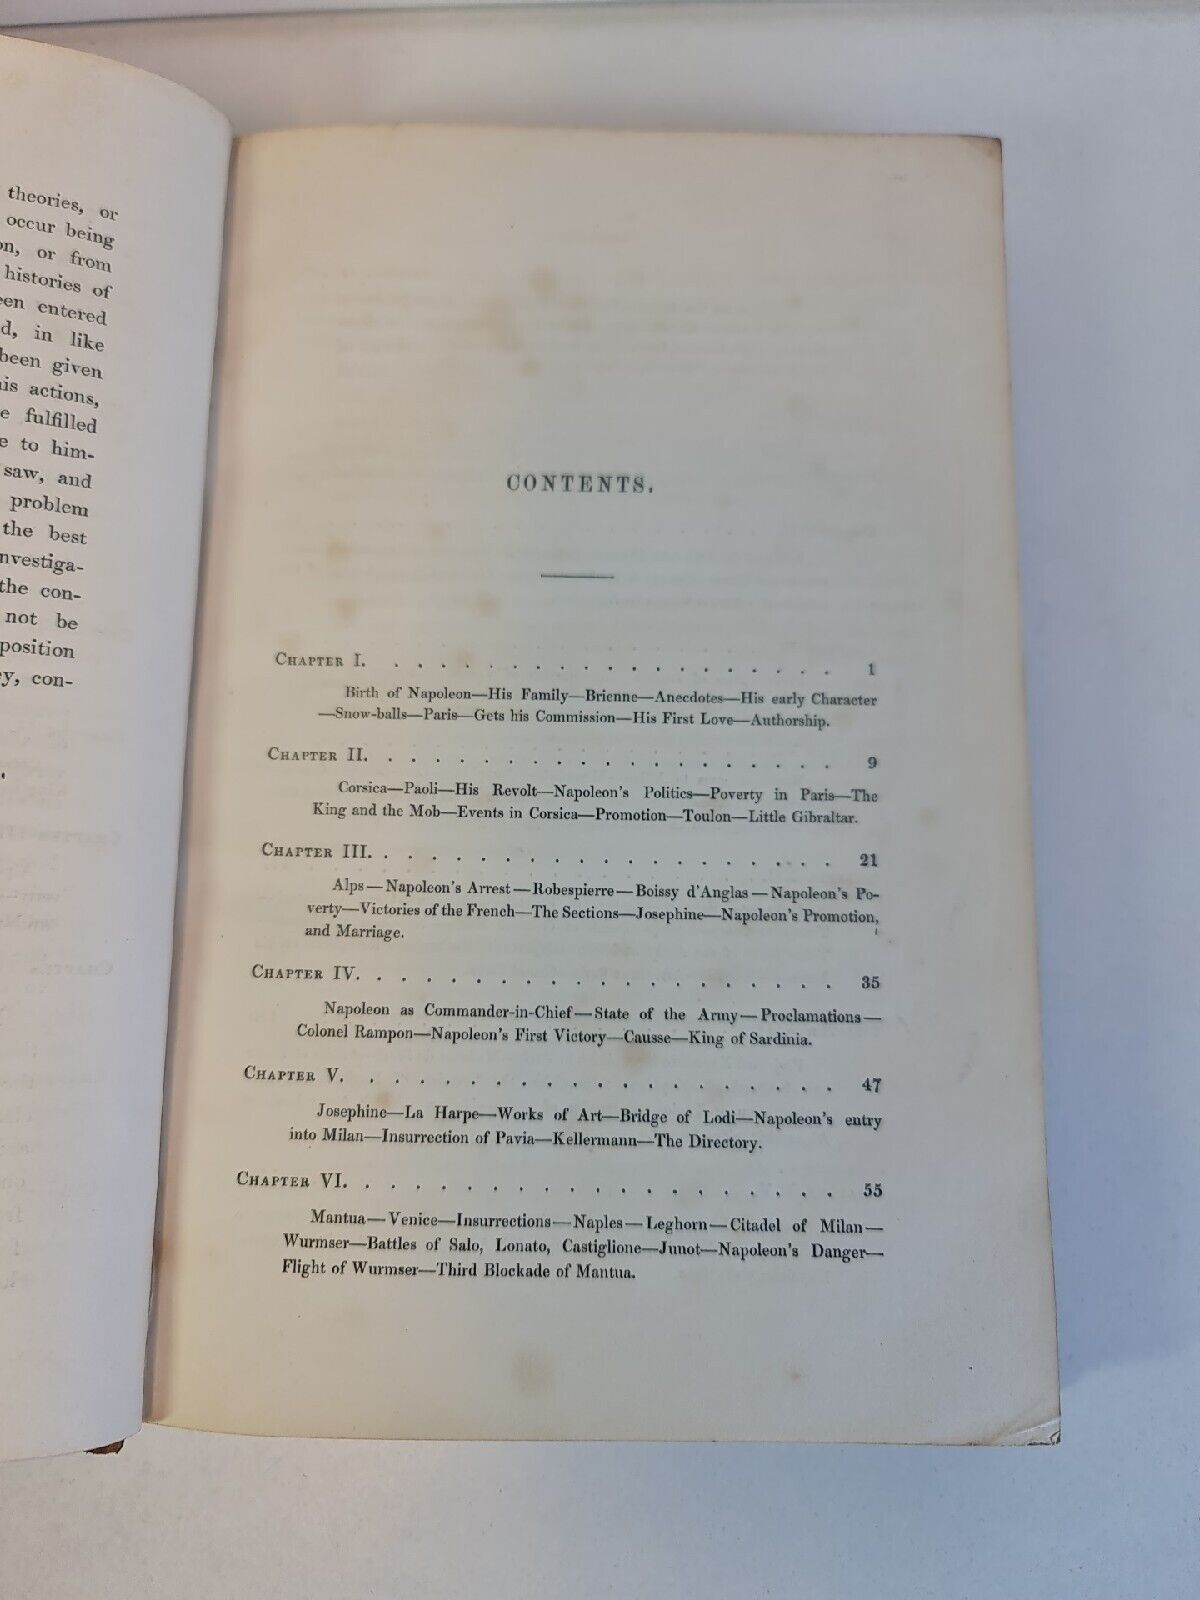 The History of Napoleon Vol 1 by Horne (1841)